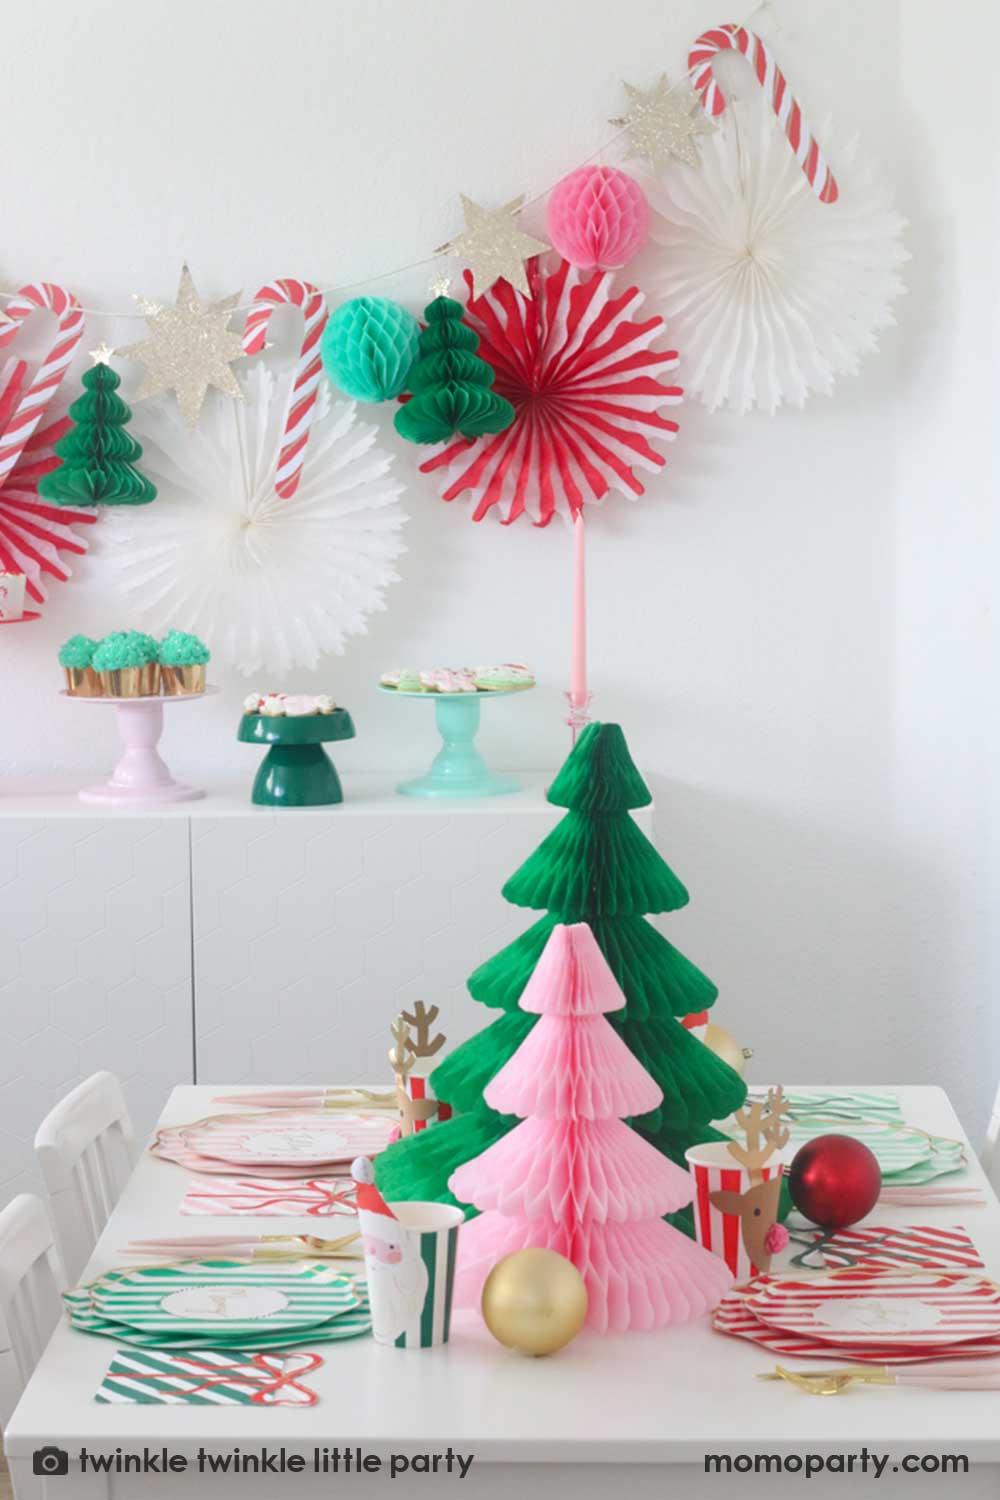 A Christmas party table featuring Momo Party's festive striped party tableware in pink red and green with Christmas tree honeycombs as the centerpiece. In the back is a Christmas dessert table decorated with Momo Party's Christmas honeycomb decorations featuring candy canes, honeycomb Christmas trees and mint honeycomb balls. On the table there are multiple cake stands in red, pink, green and mint with Holiday treats like cookies, cupcakes and baked food, making this a perfect Holiday party inspo.